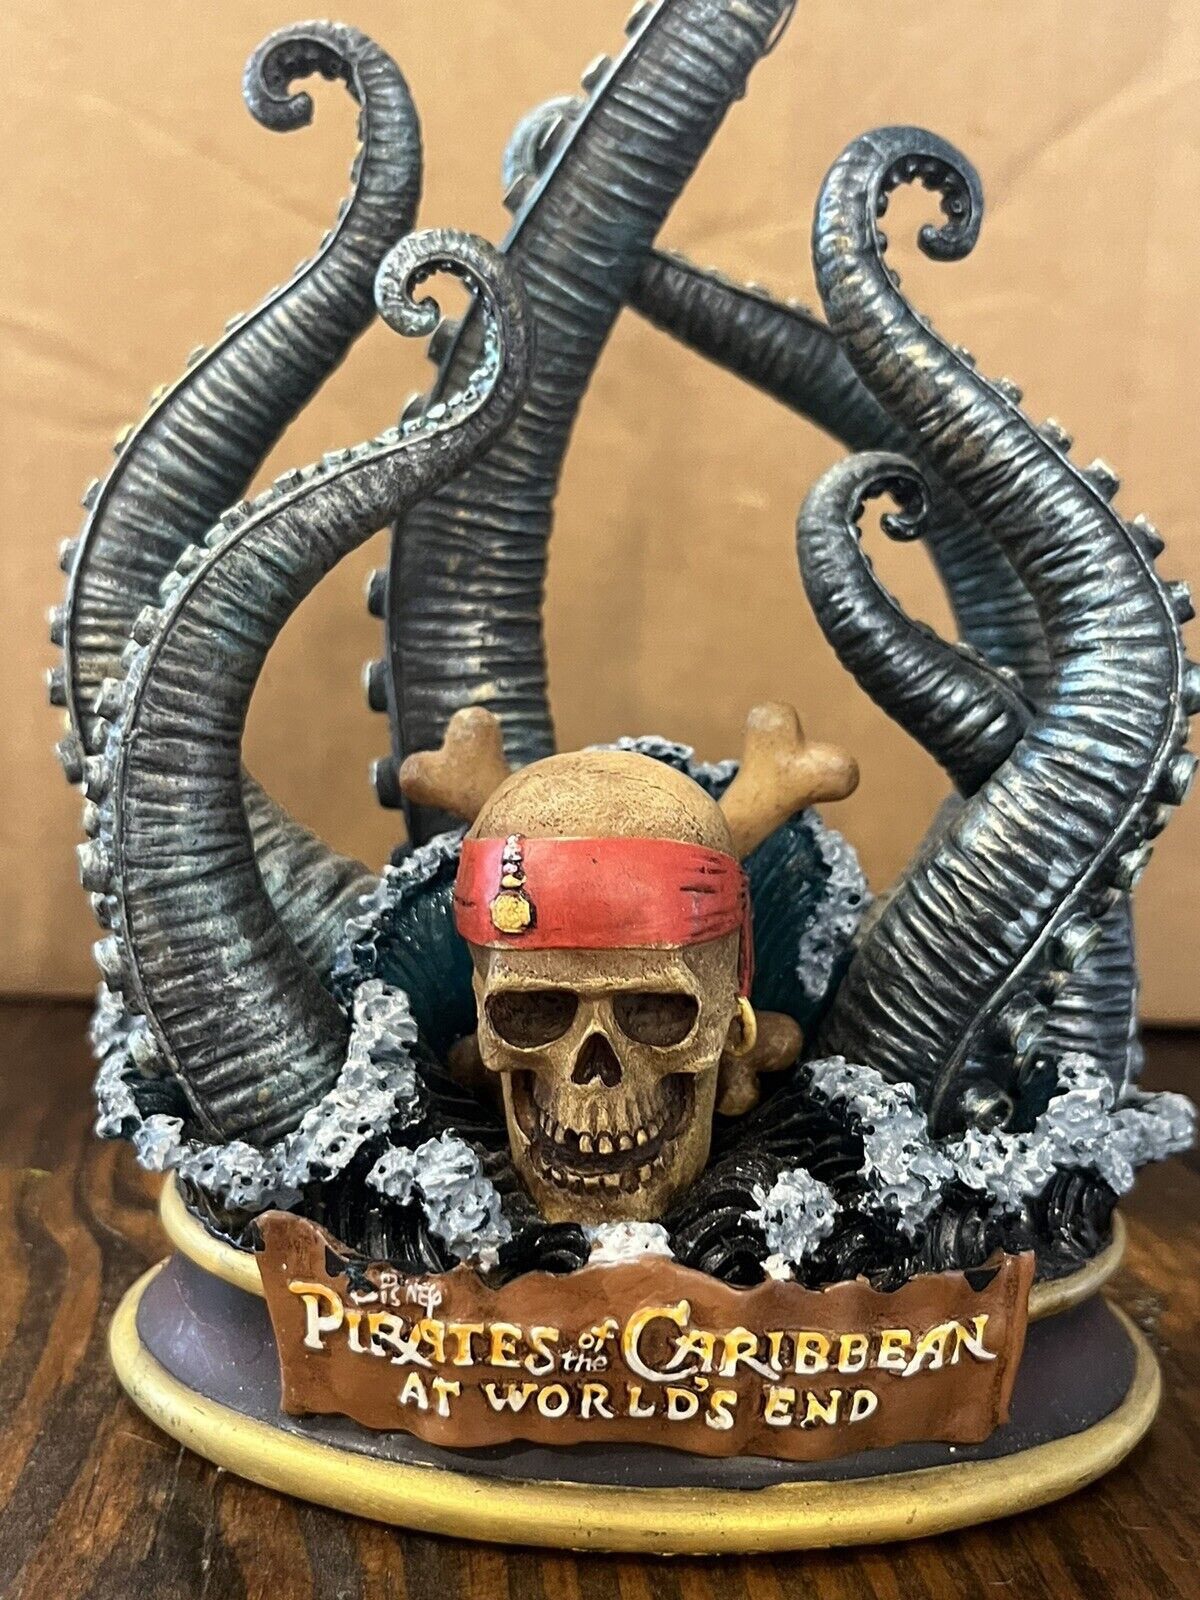 Disney Pirates Of The Caribbean At Worlds End Skull And Kraken Figurine - Statue